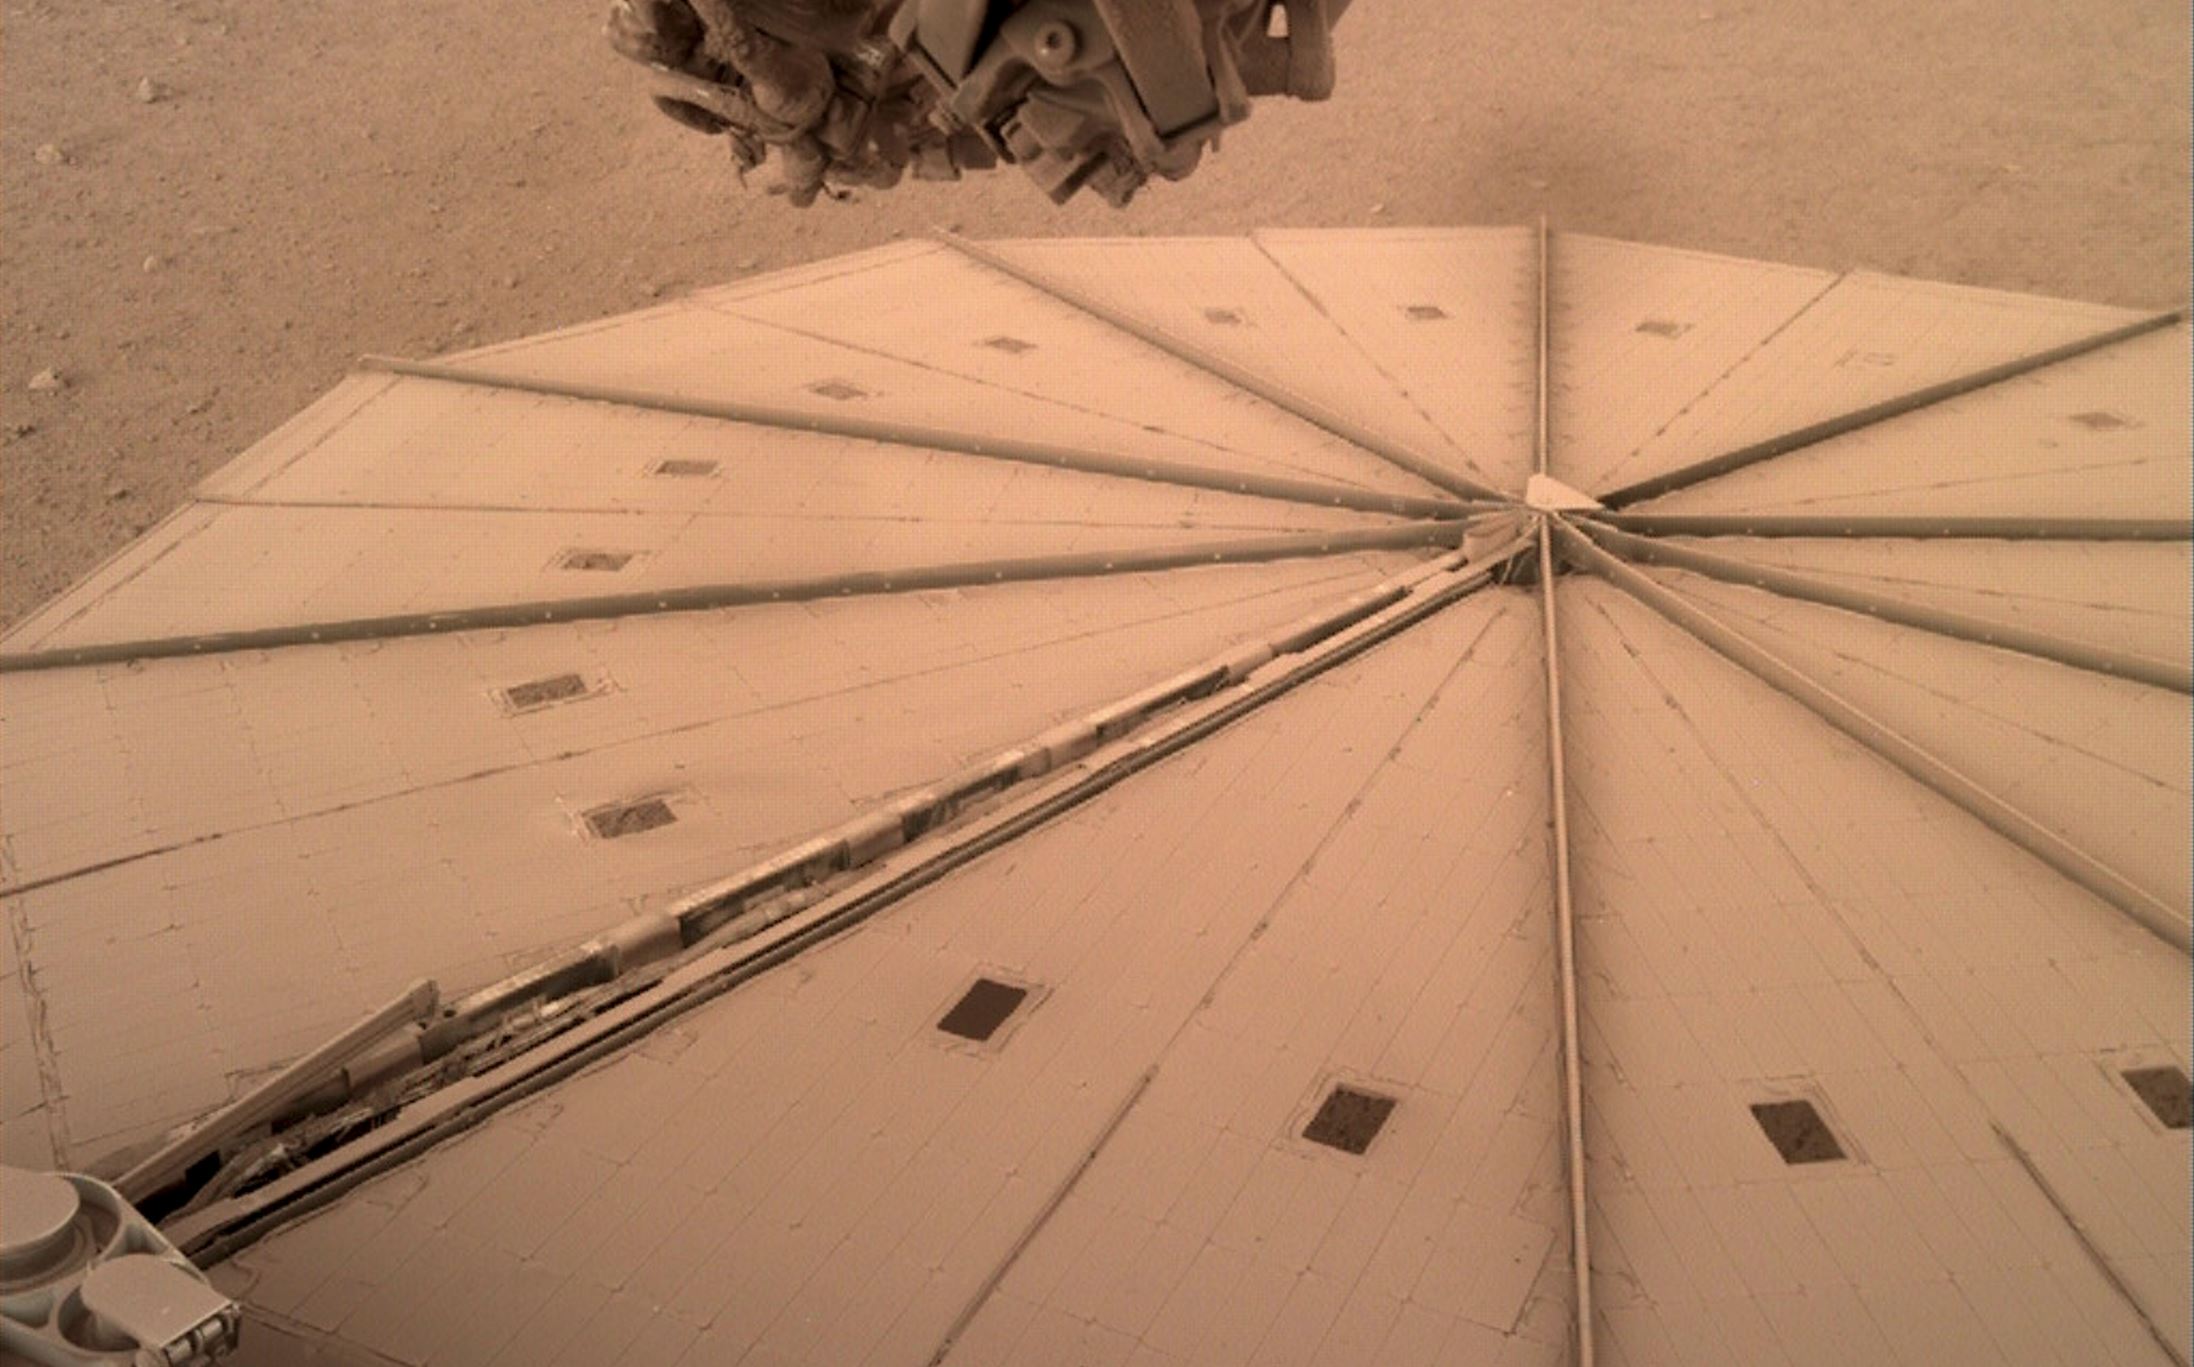 A photograph by InSight showing its solar panels covered in dust. Credit: NASA.